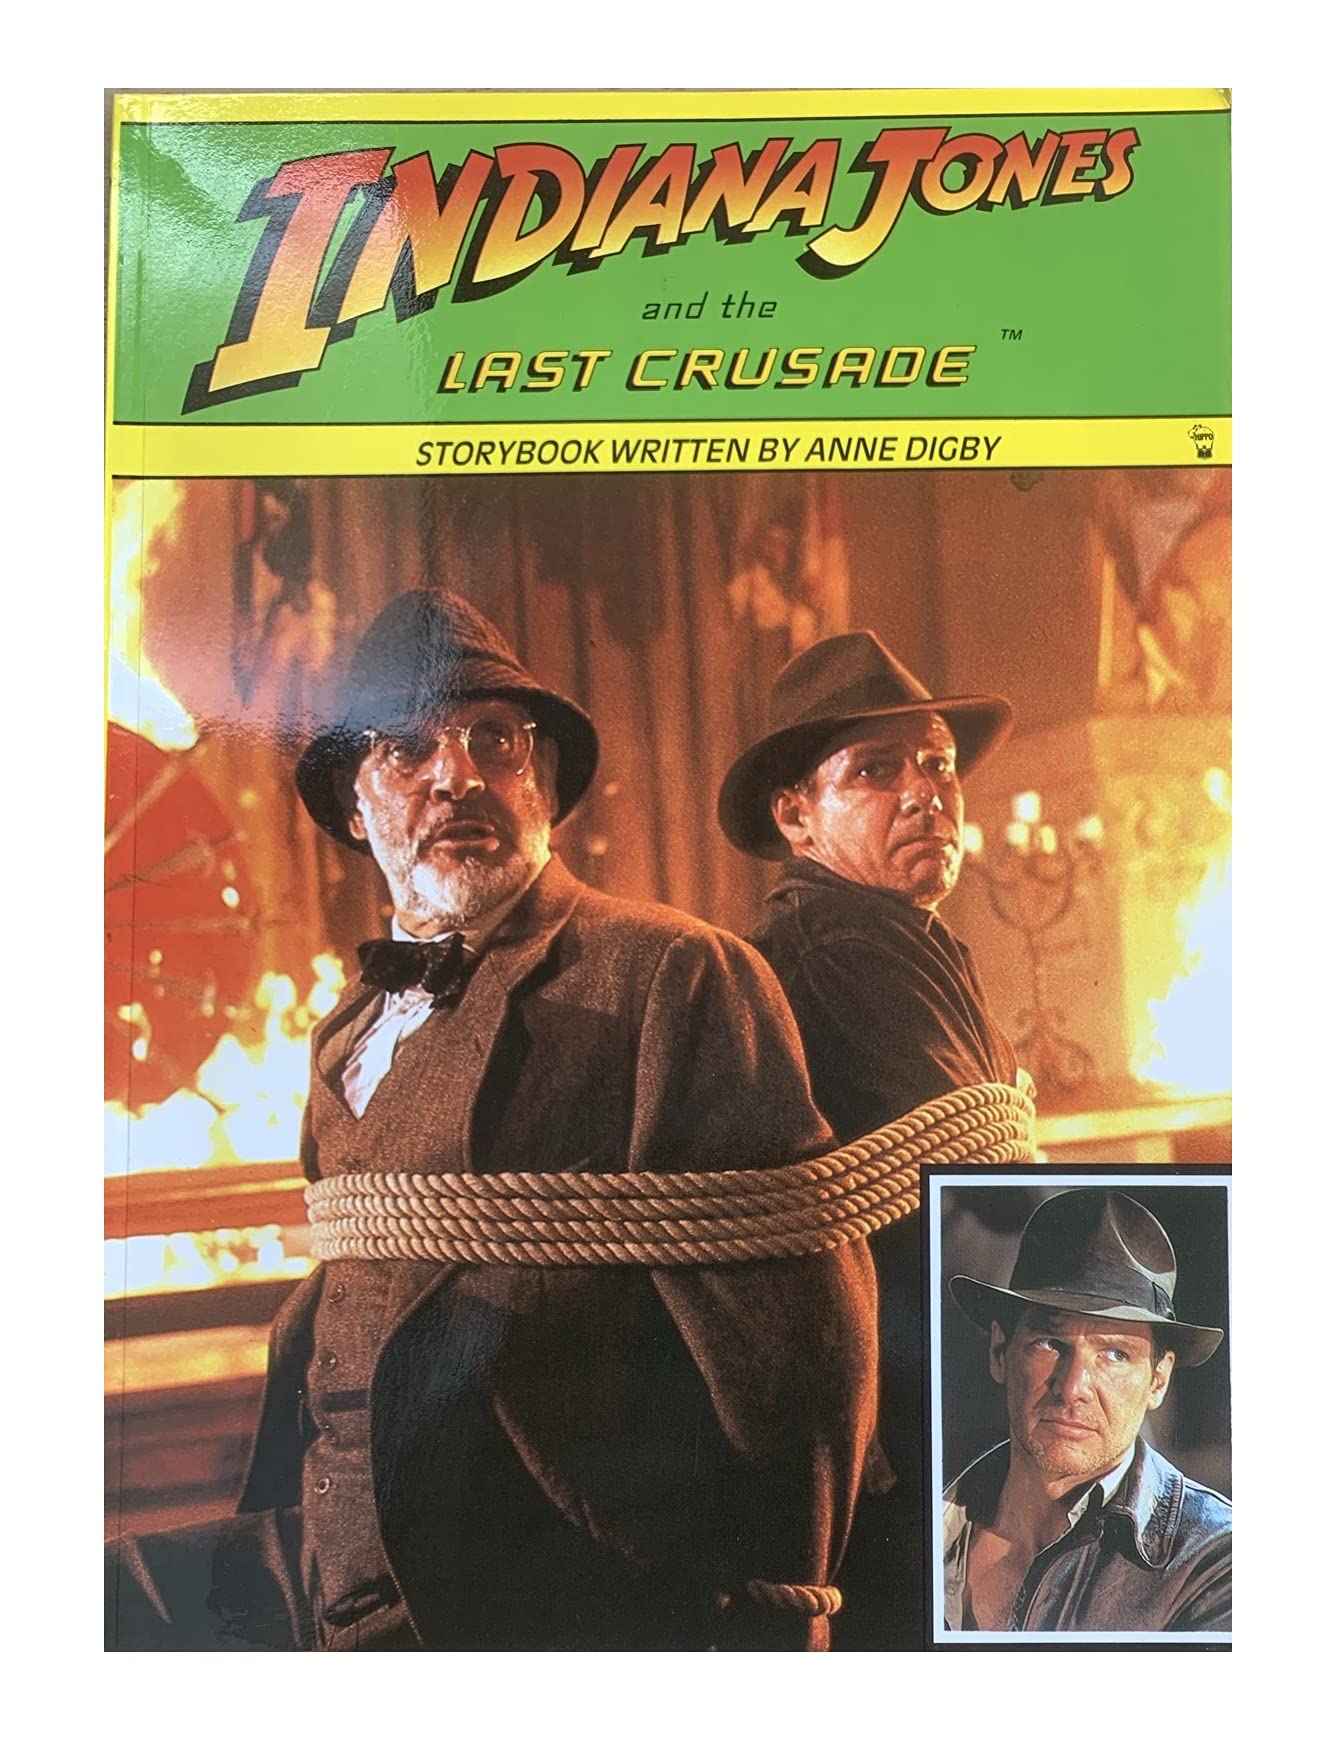 Vintage Indiana Jones And The Last Crusade Storybook Based On The Movie - Shop Stock Room Find